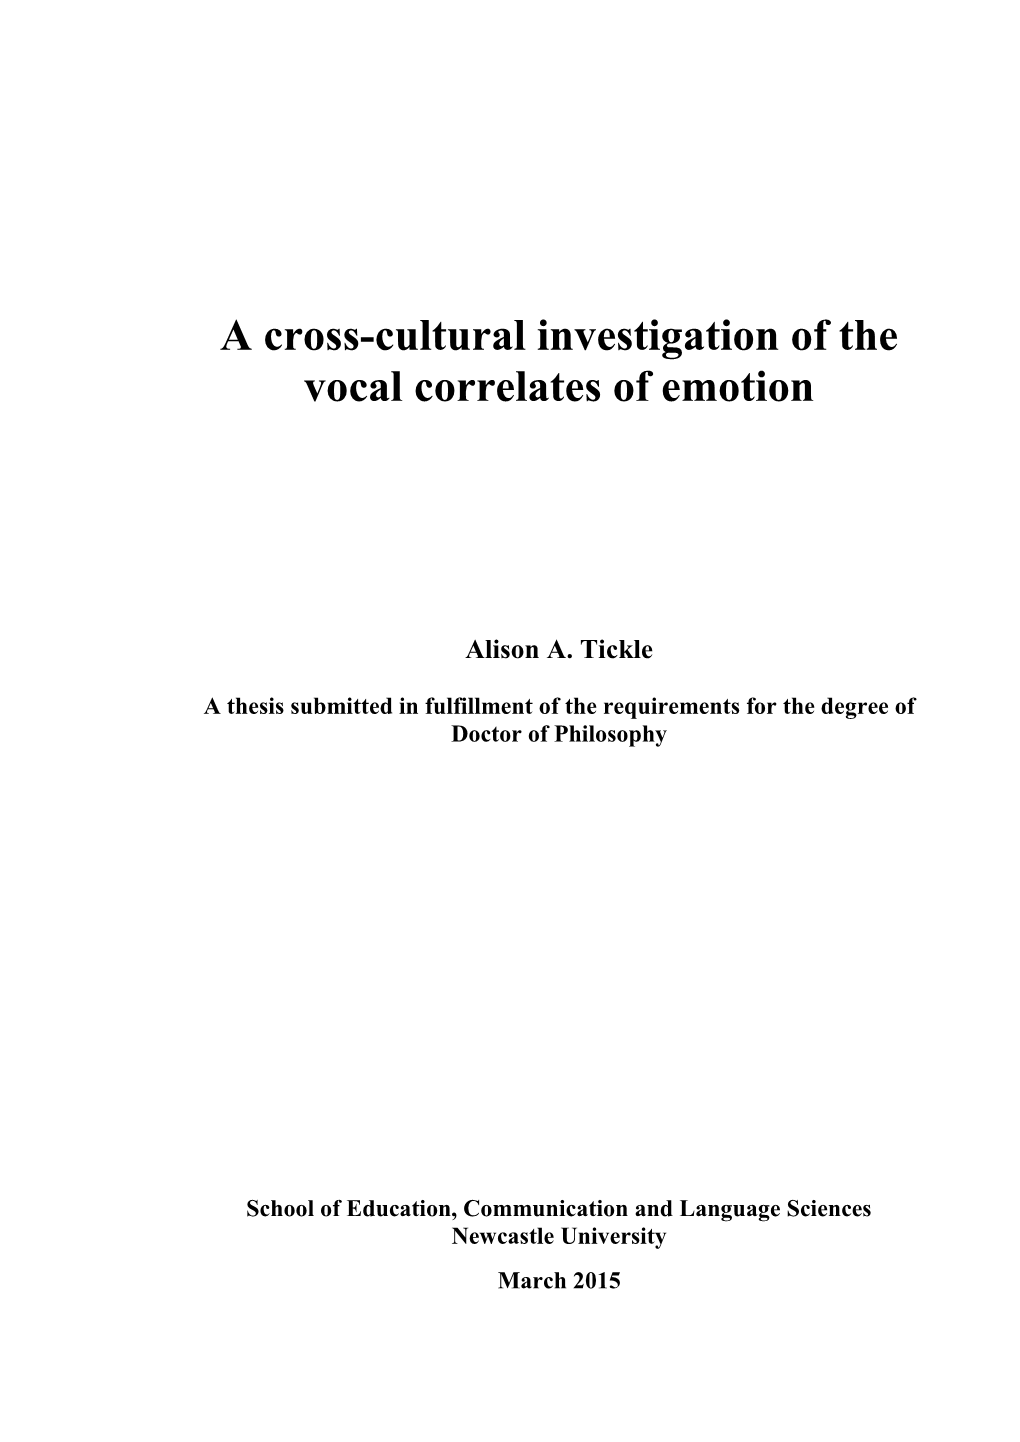 A Cross-Cultural Investigation of the Vocal Correlates of Emotion